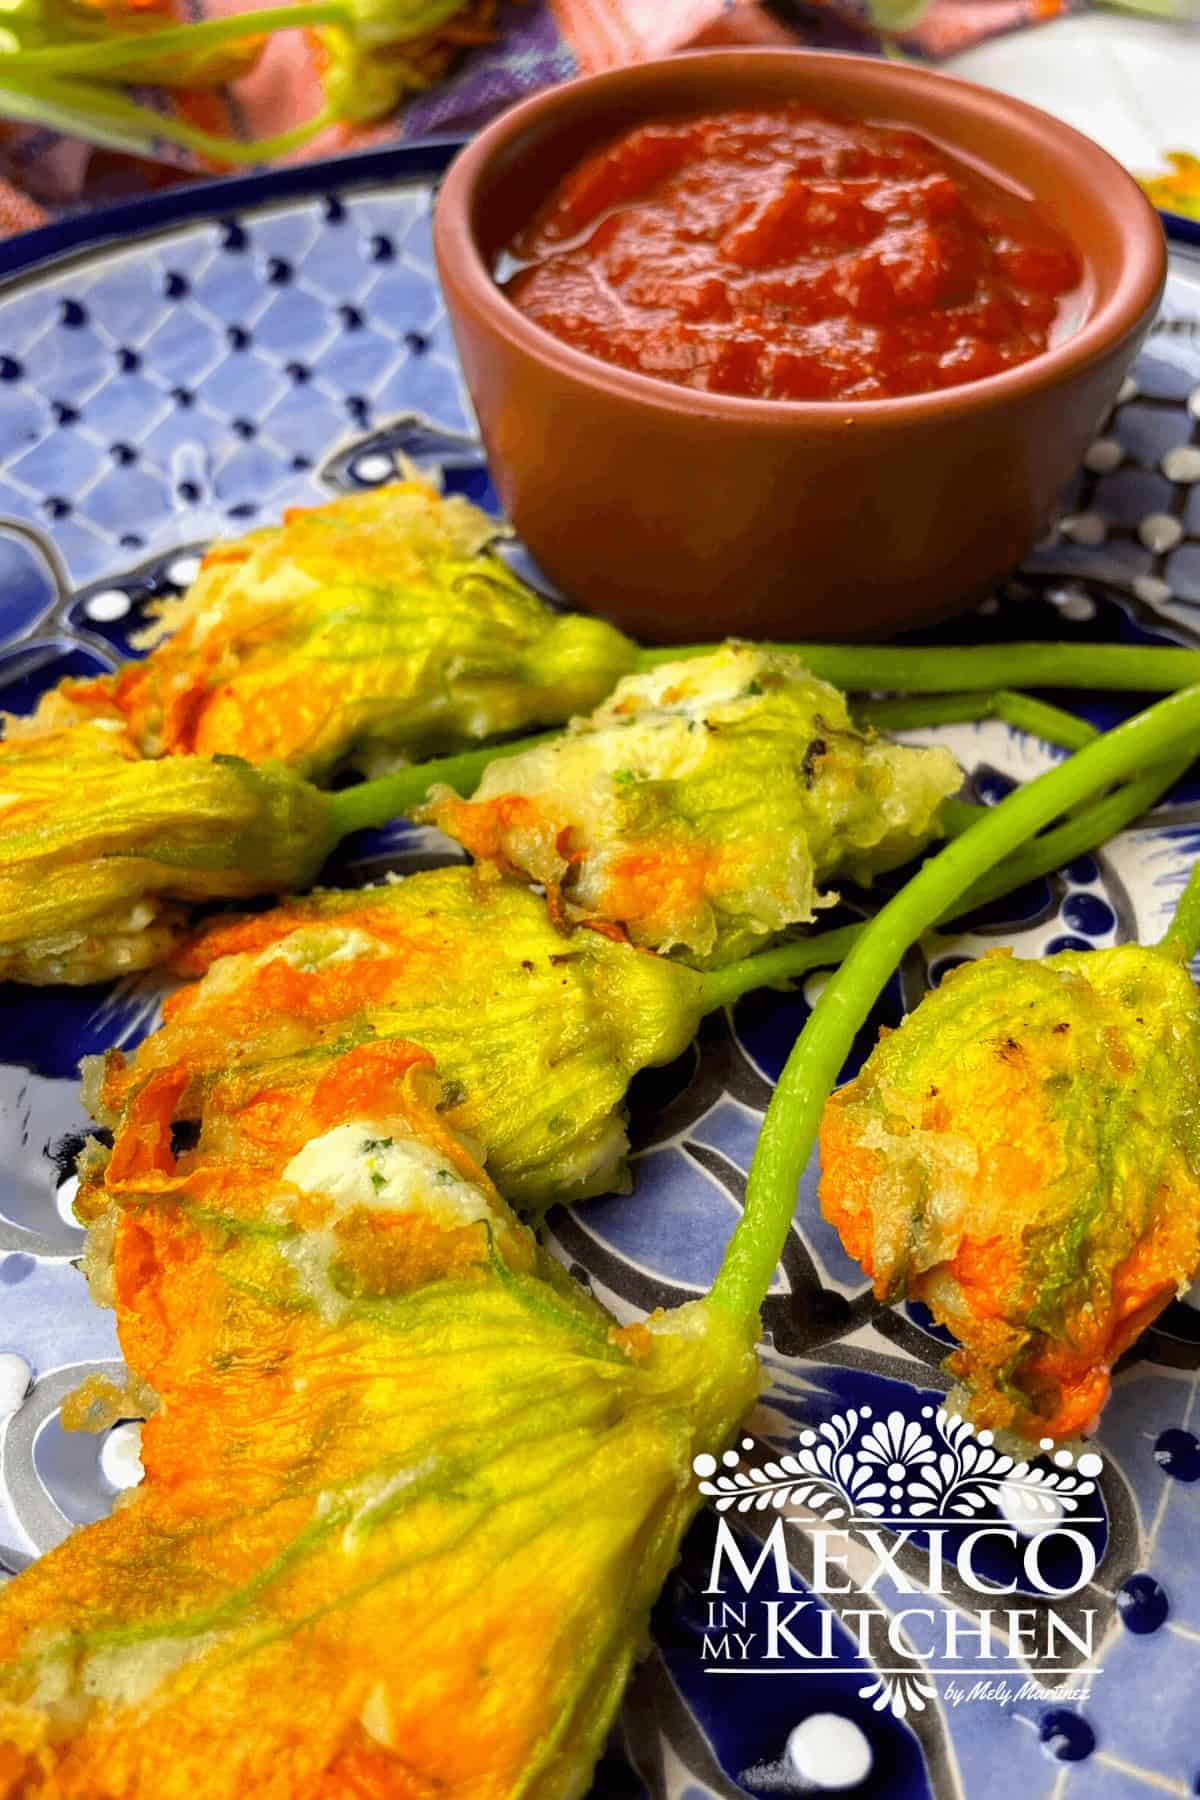 Fried and stuffed squash blossoms on a plate